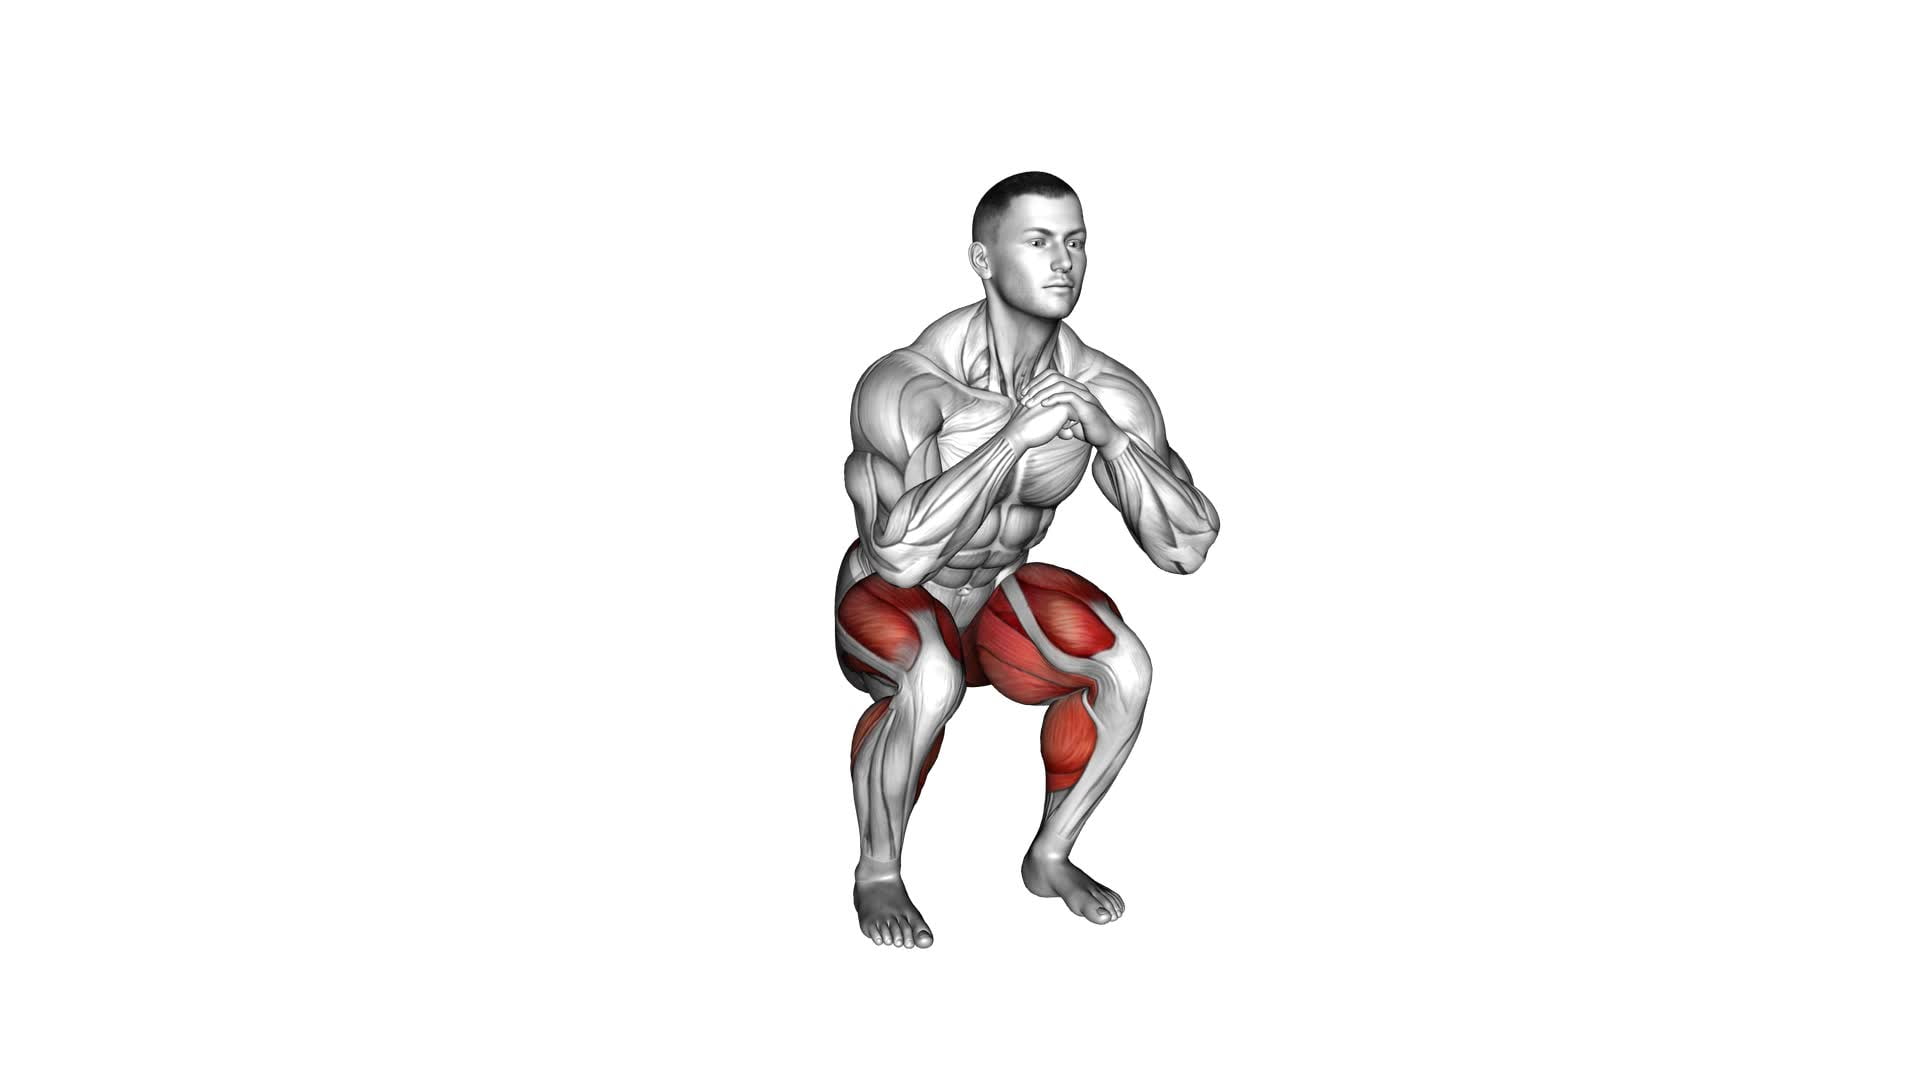 Squat Jack (male) - Video Exercise Guide & Tips